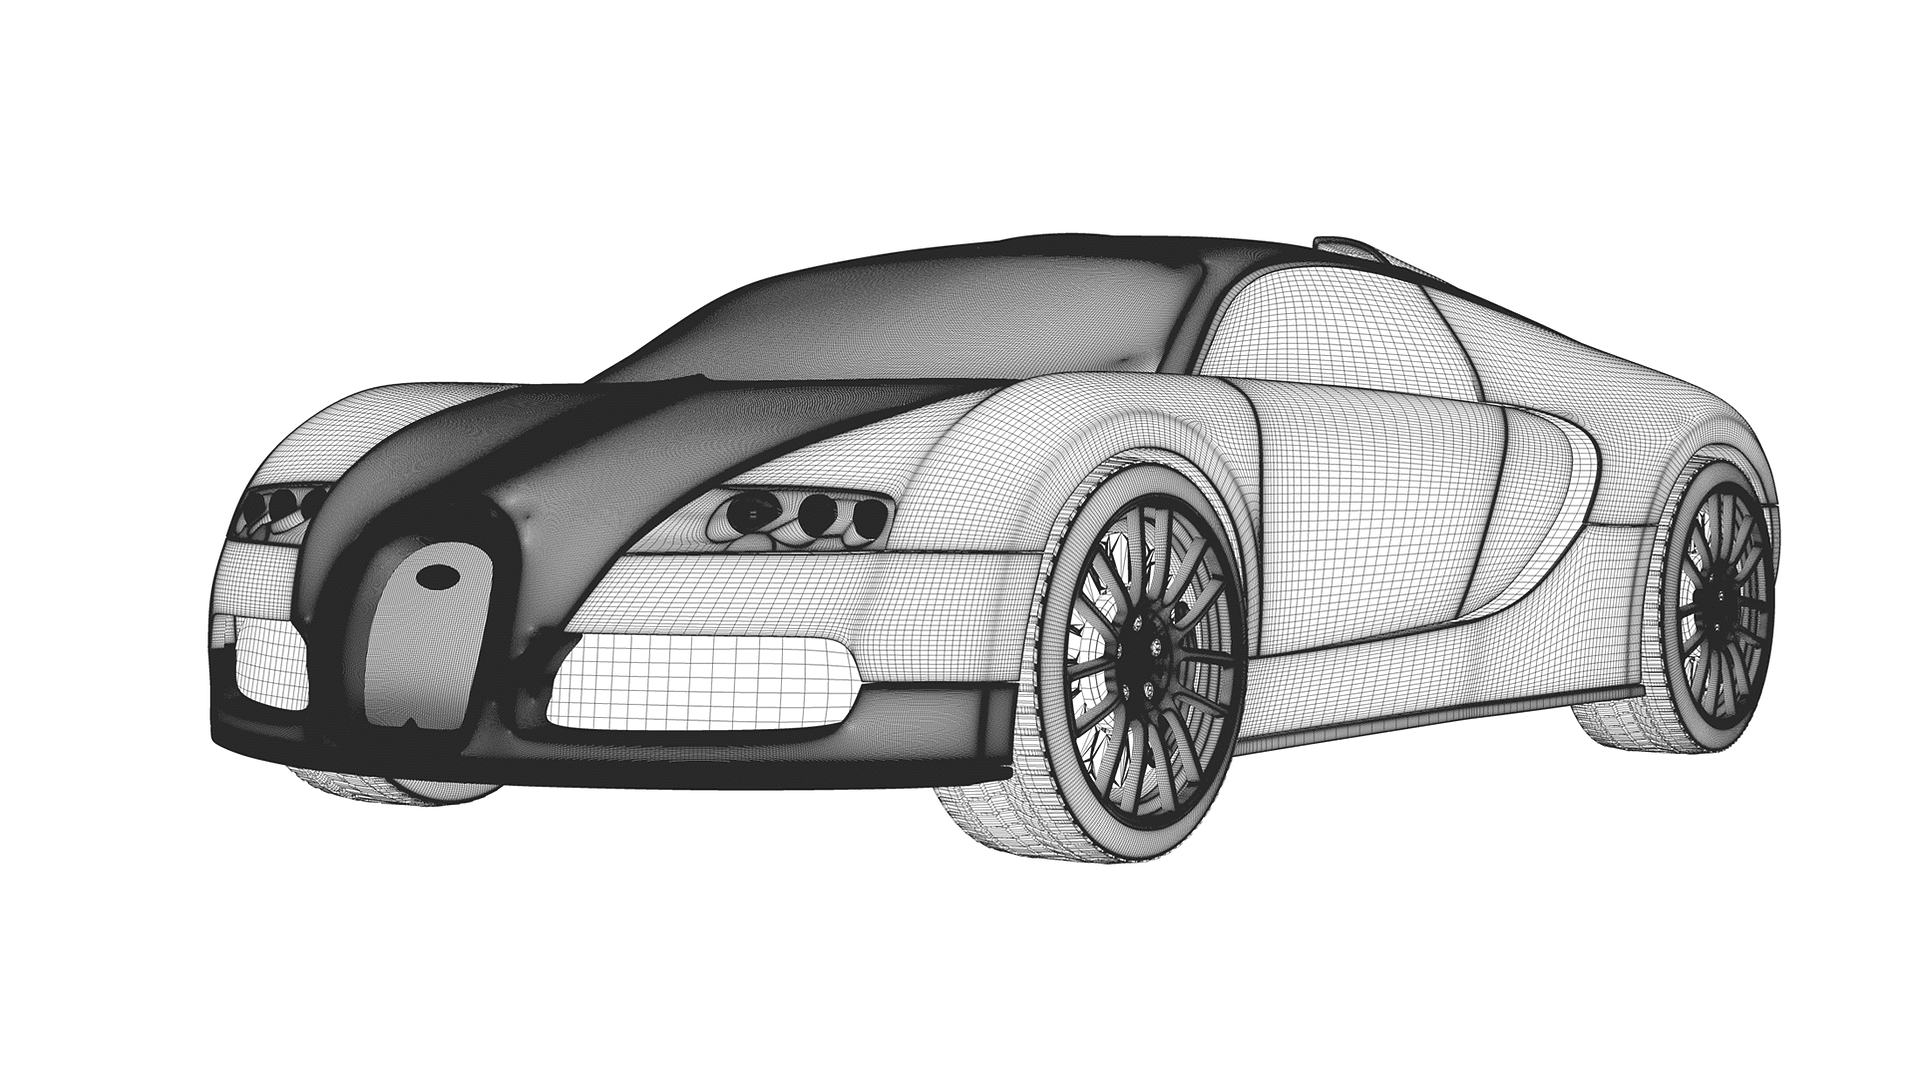 Design and Model